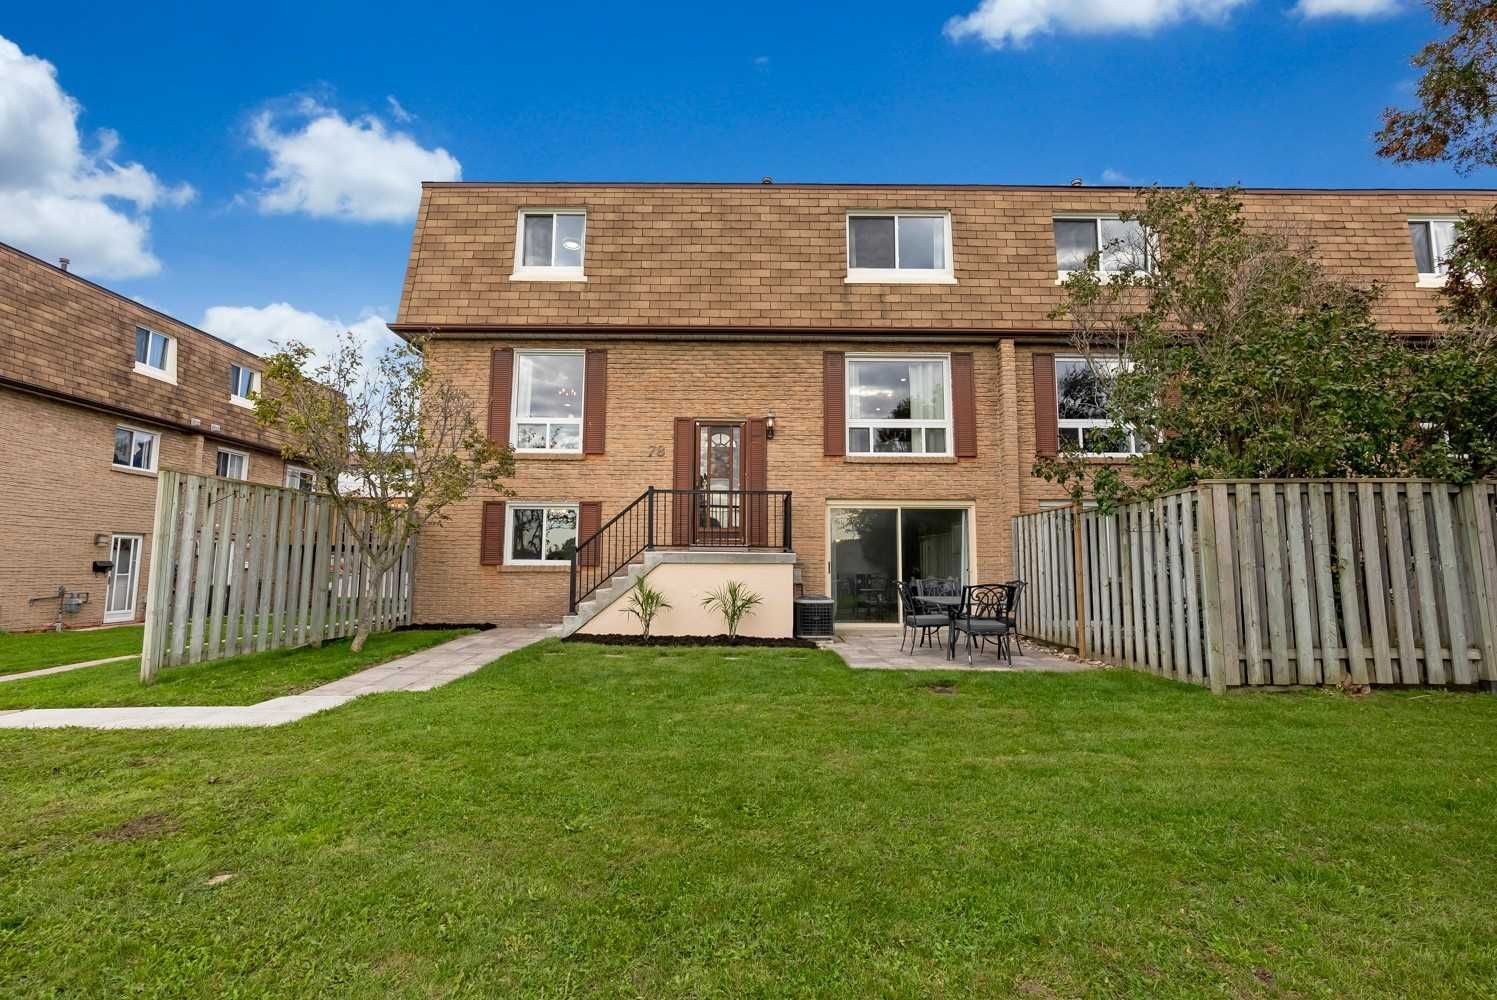 321 Blackthorn Street. 320 & 321 Blackthorn Townhomes is located in  Oshawa, Toronto - image #2 of 2